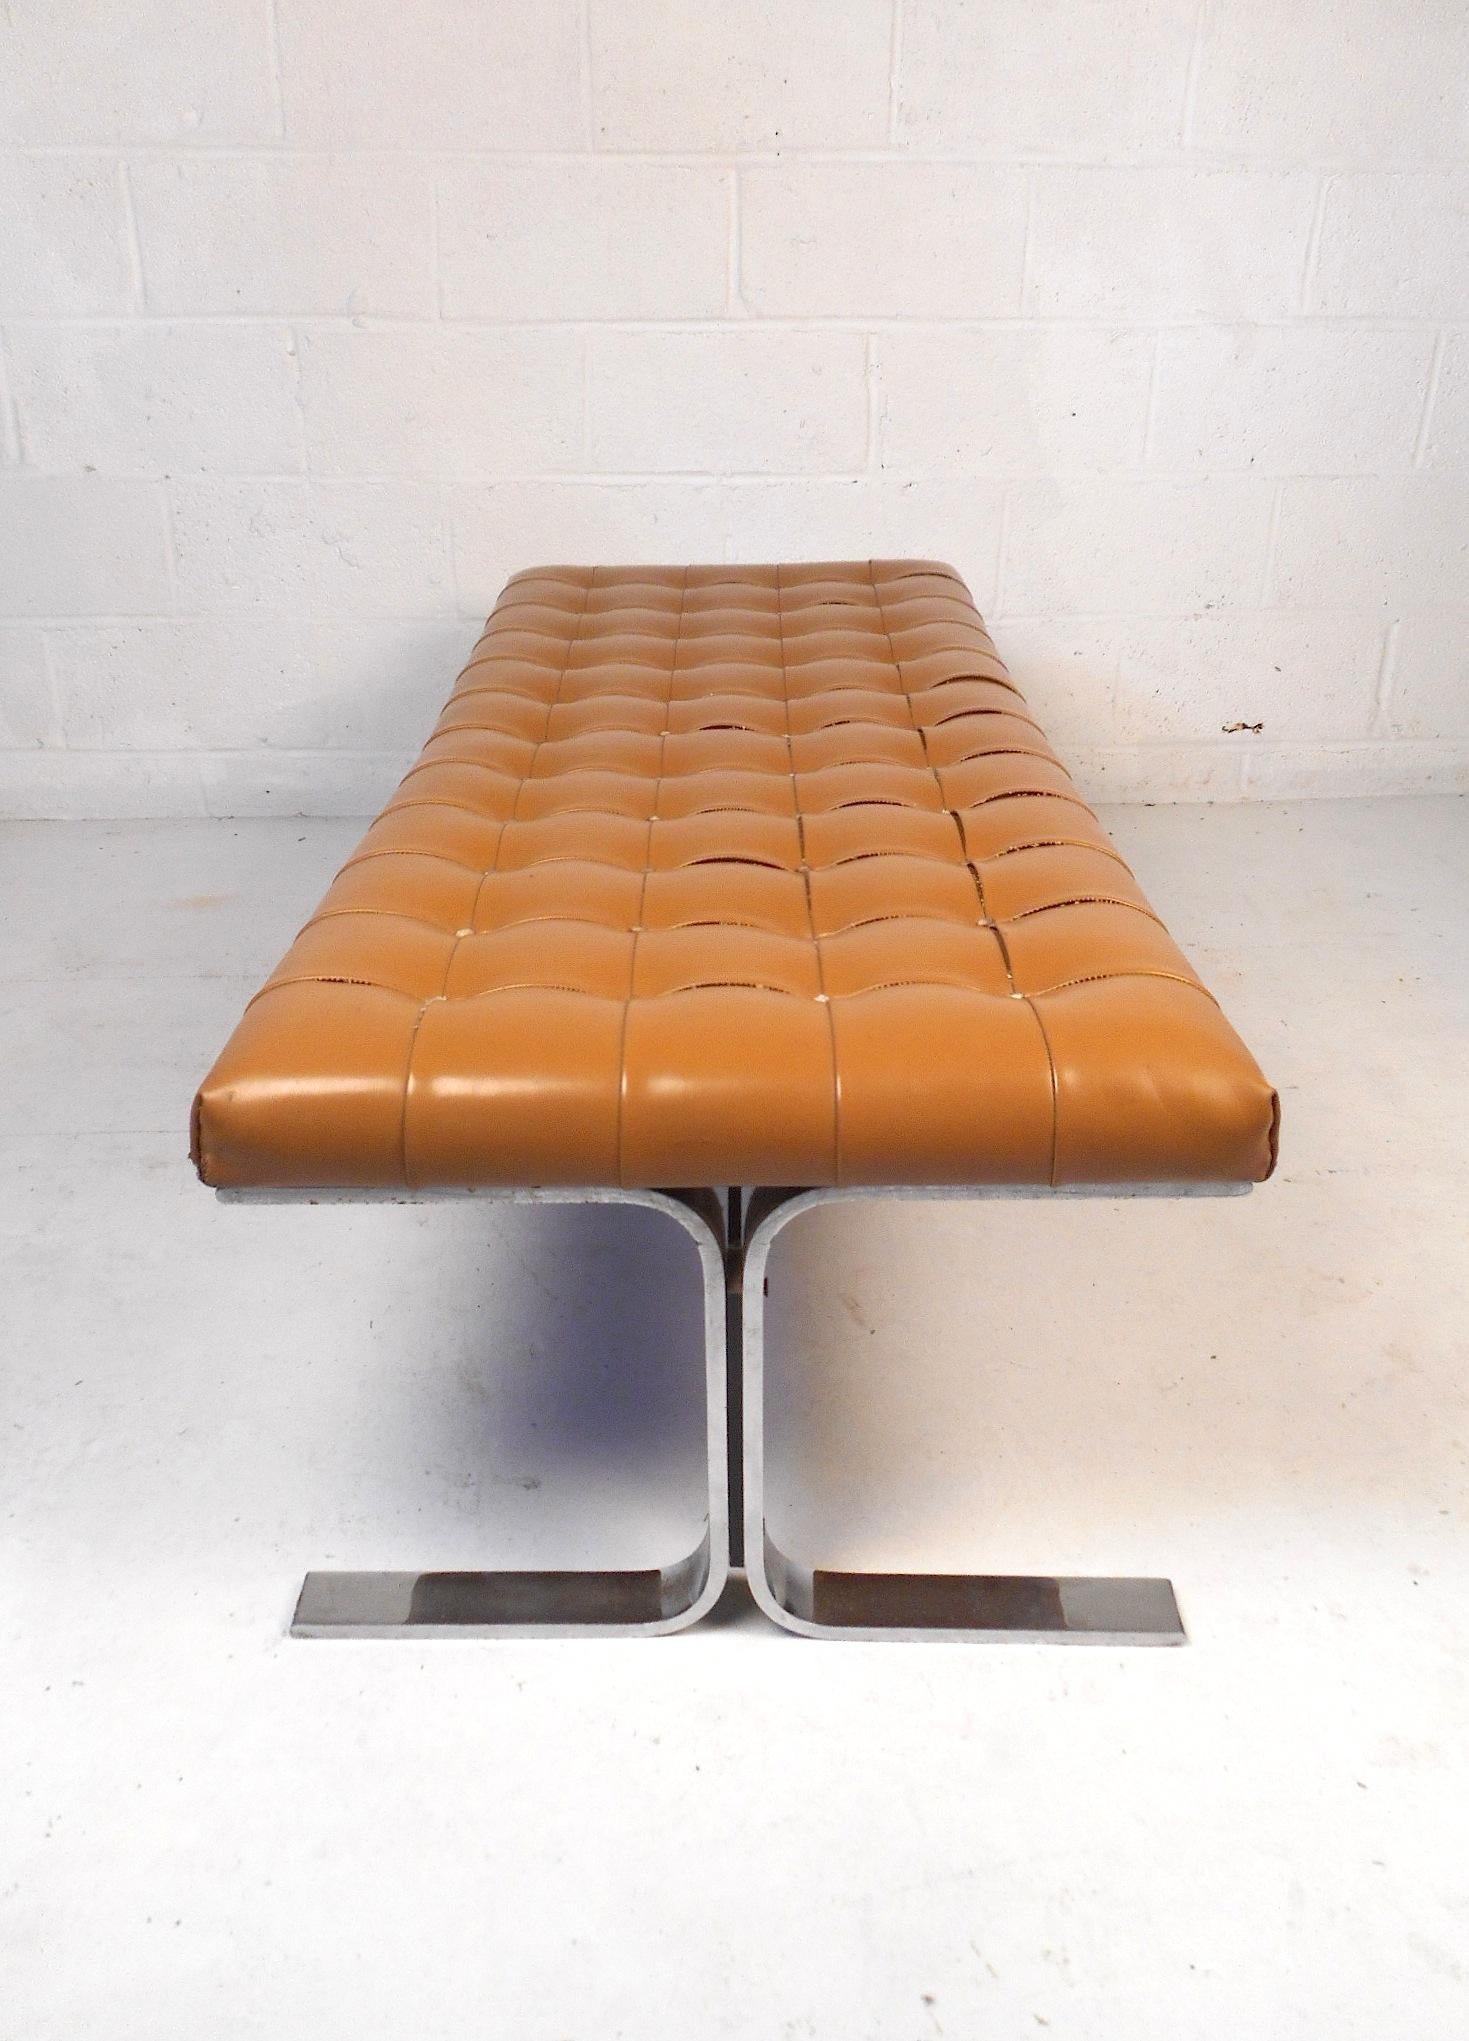 Mid-20th Century Mid-Century Modern Tufted Faux-Leather Bench by Meuller Furniture